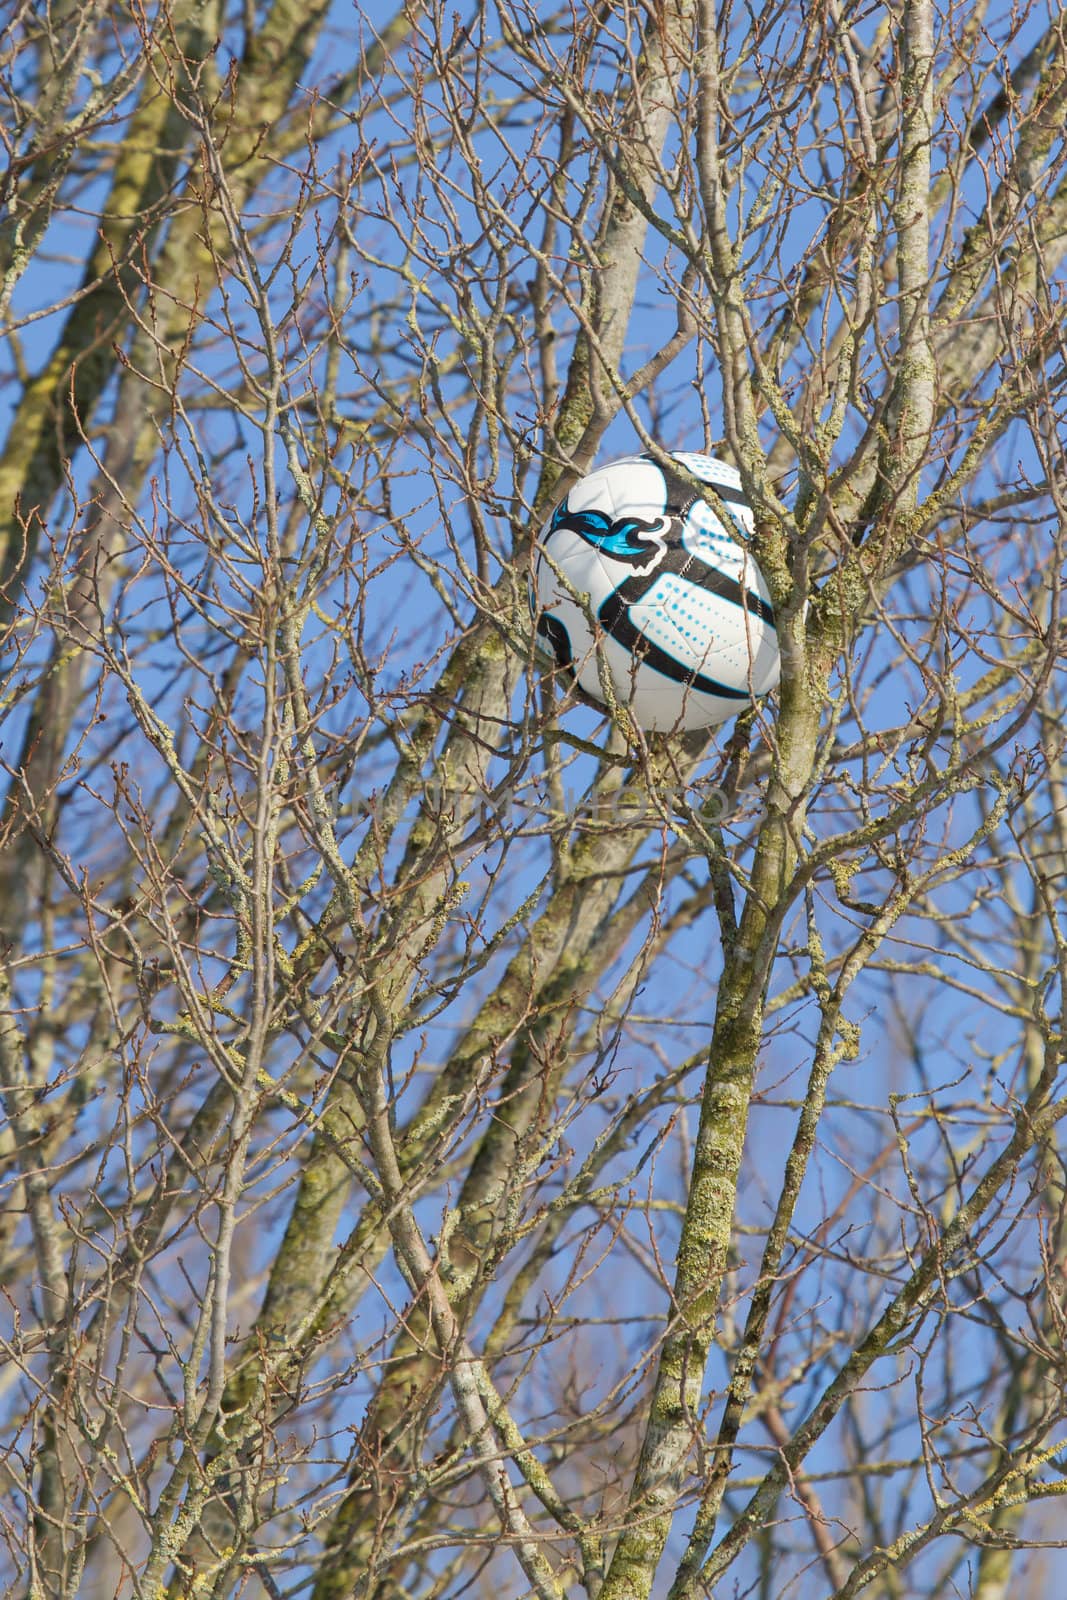 A football in a tree